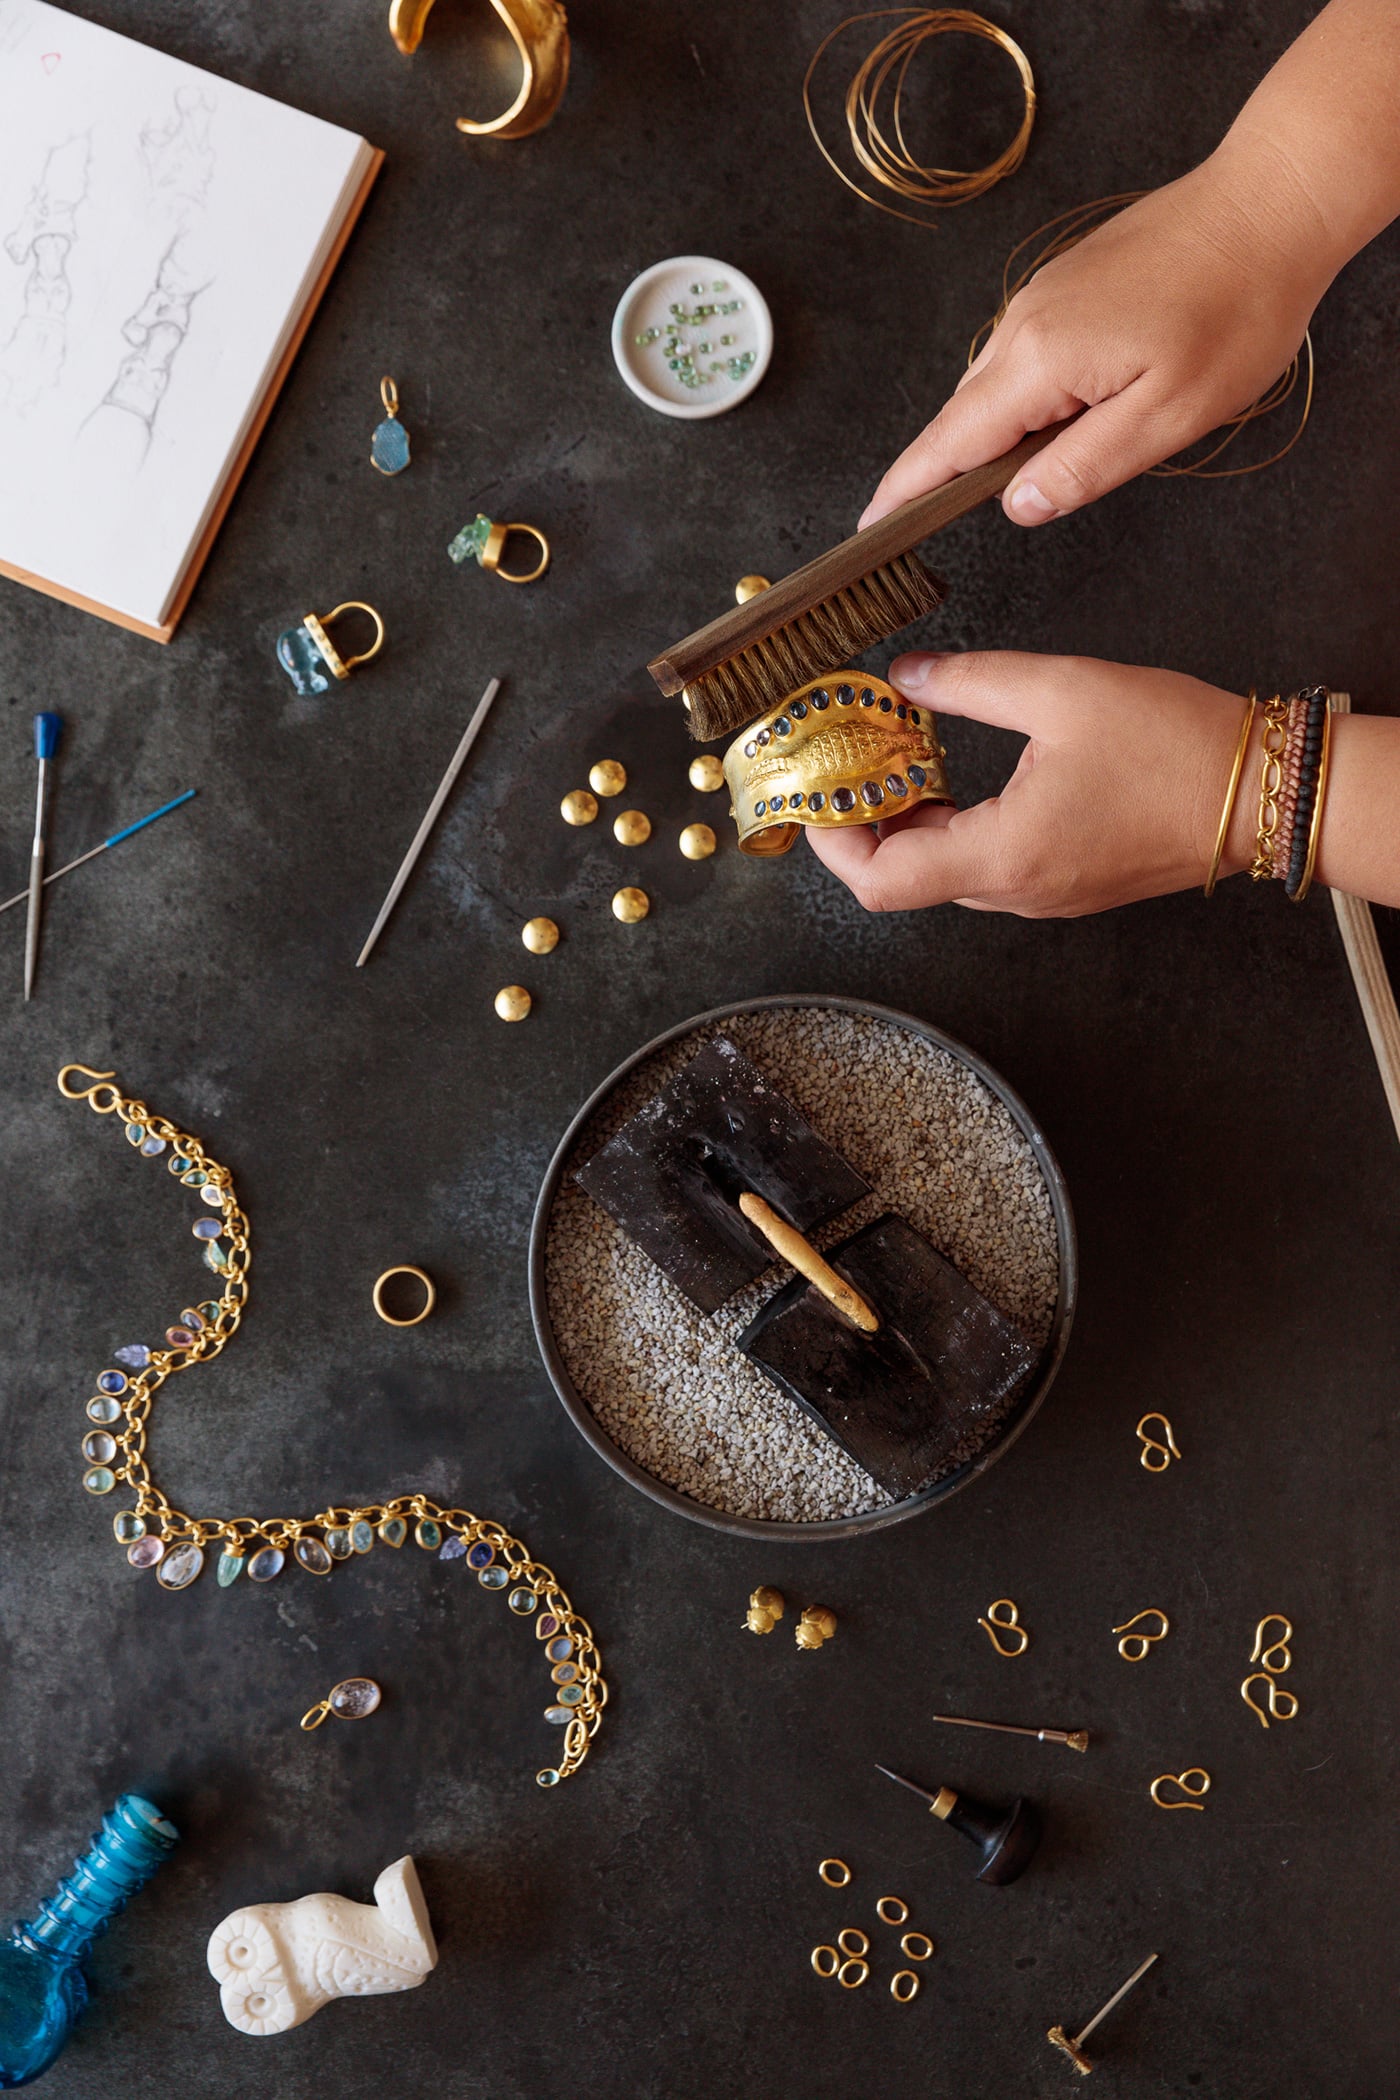 A New Wave Jewelry Genius Who Makes Her Pieces the Old-Fashioned Way